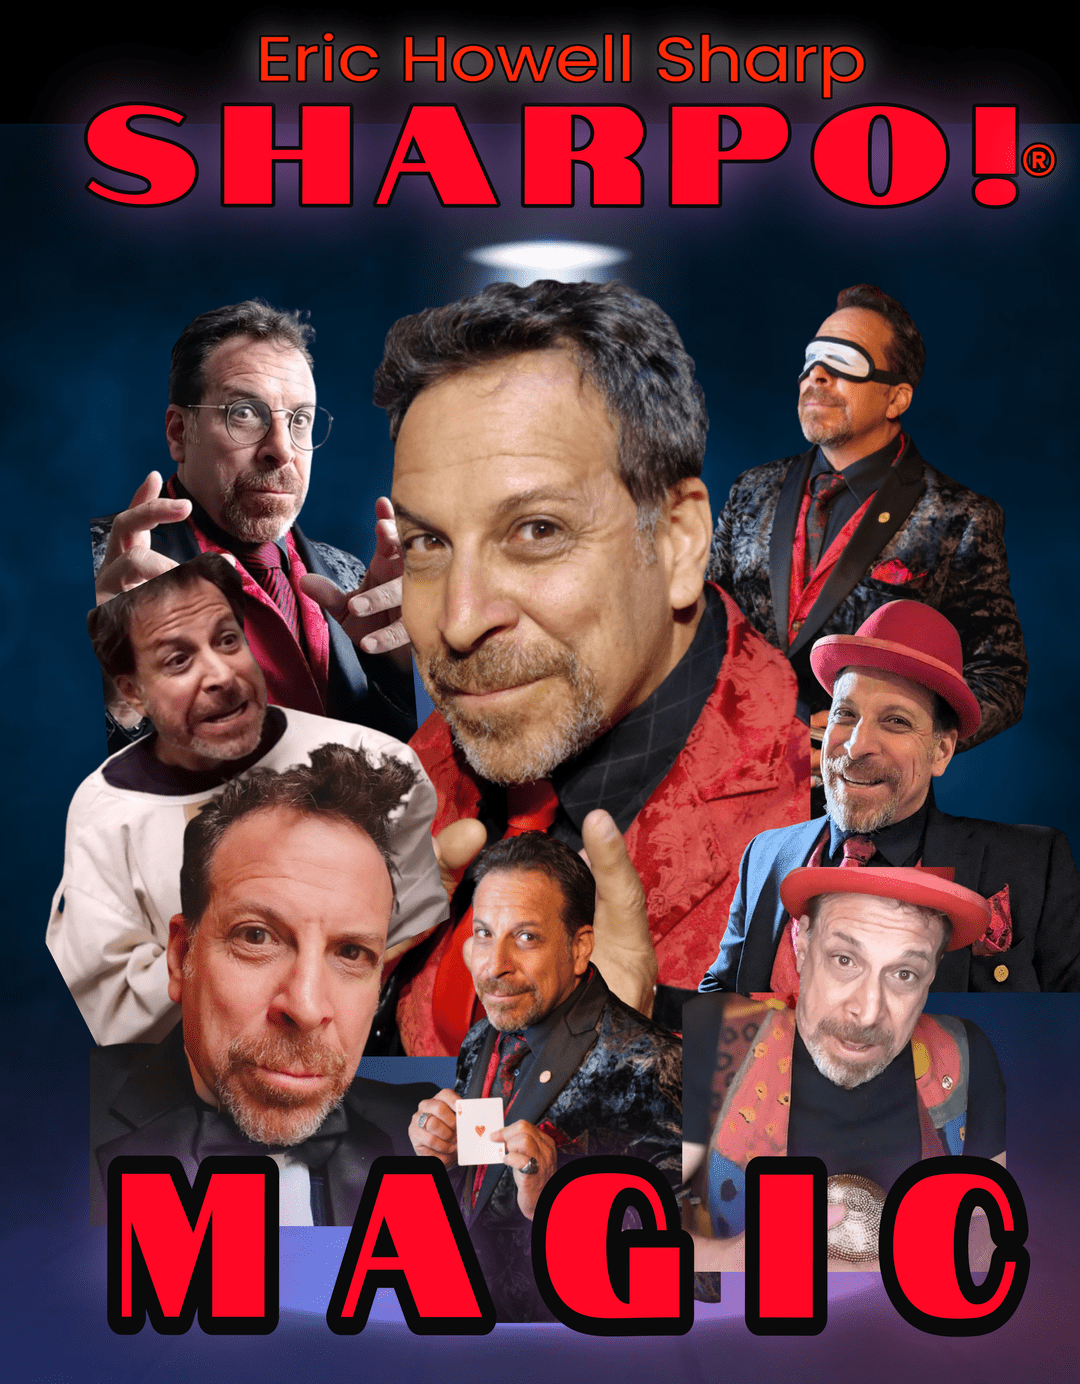 Sharpo Mystery and Magic is Fun and Fantastic!  Close Up, Parlor, Mentalism, Escapes and more interactive excitement by the master of mischief, Sharpo!